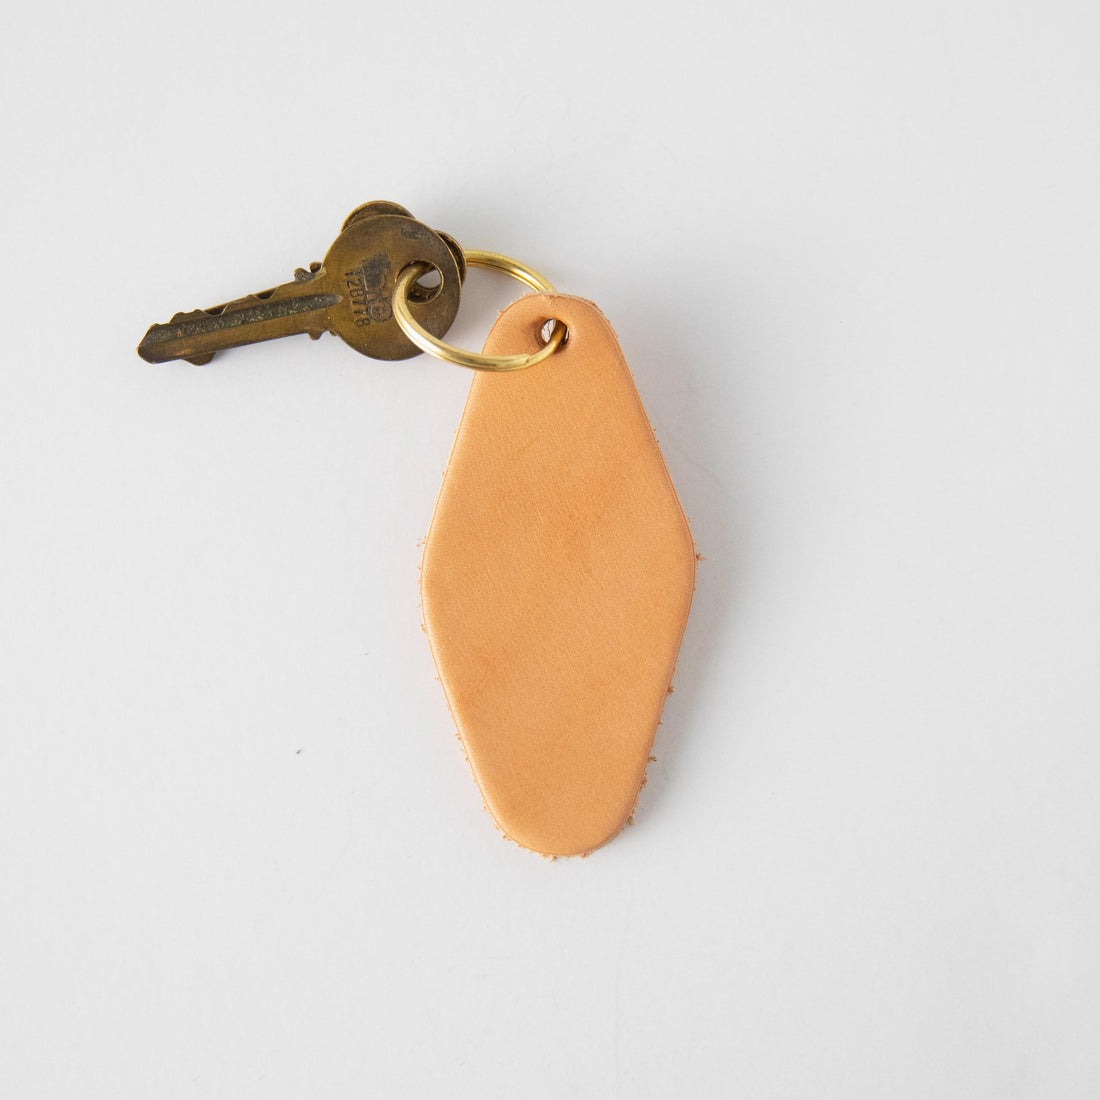 Vegetable Tanned Hotel Key Fob- leather keychain - leather key holder - leather key fob - KMM &amp; Co.